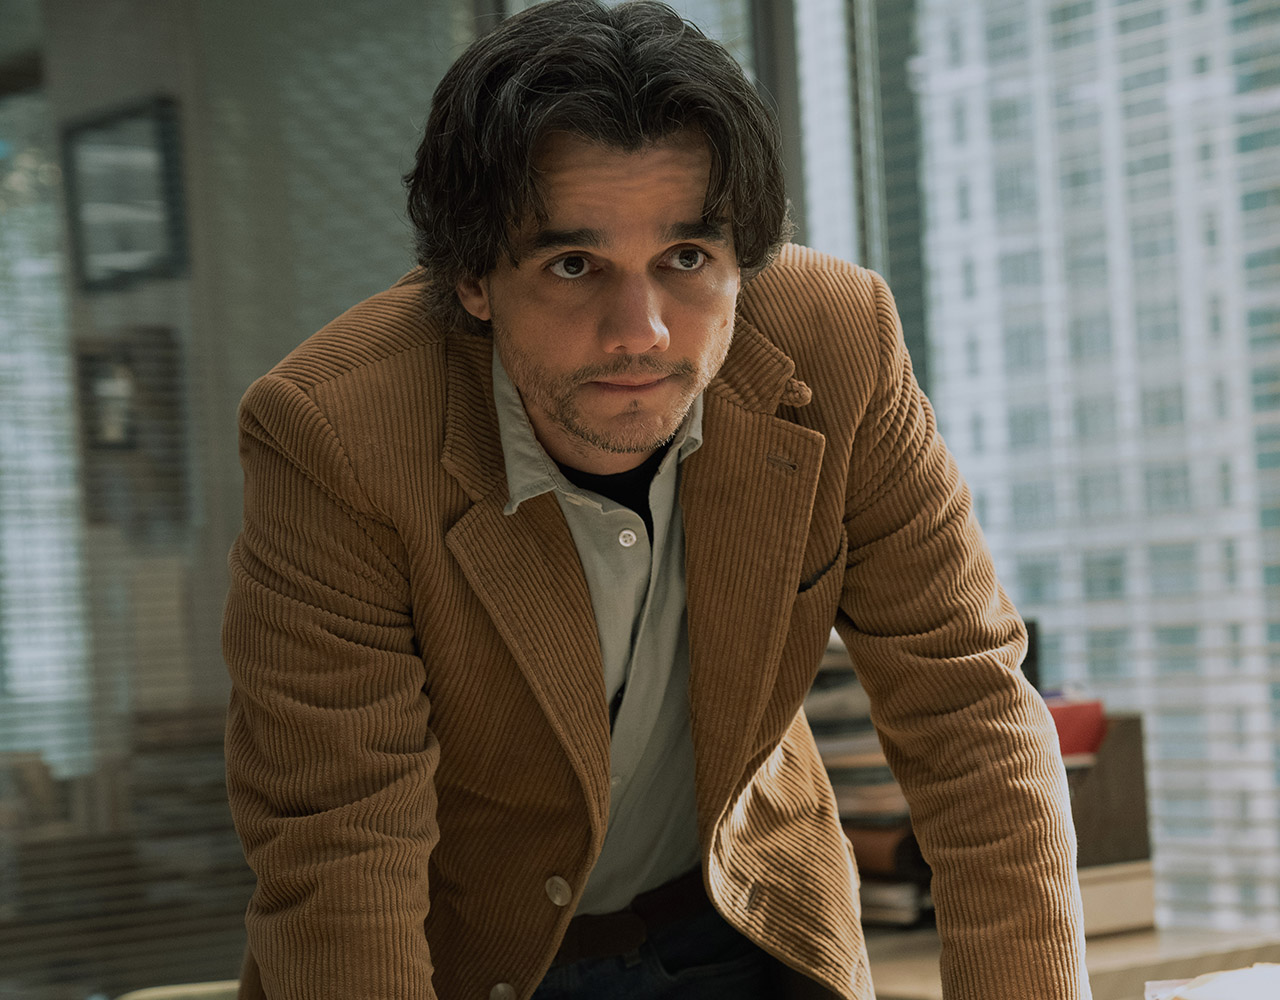 The Shining Girls Starring Wagner Moura Is Must-Watch Television